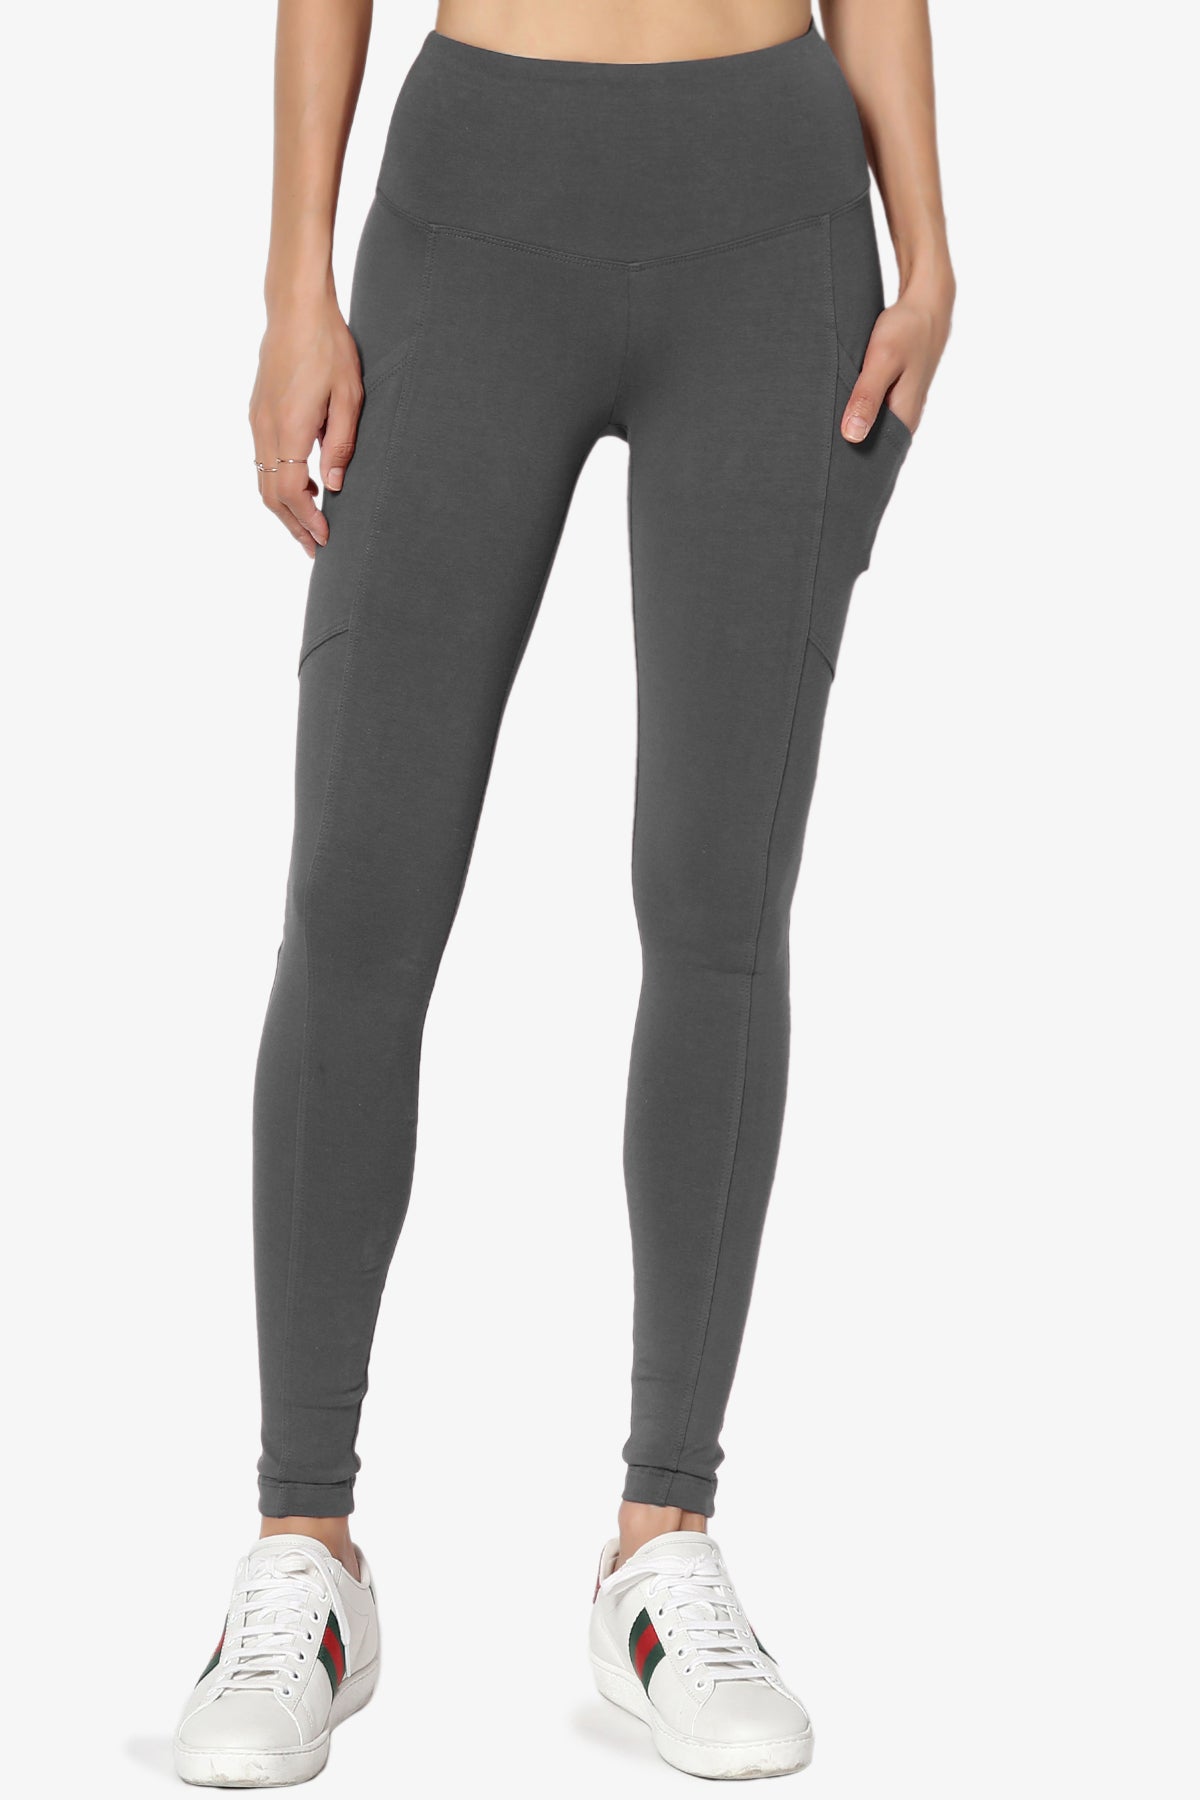 Ansley Luxe Cotton Leggings with Pockets ASH GREY_3